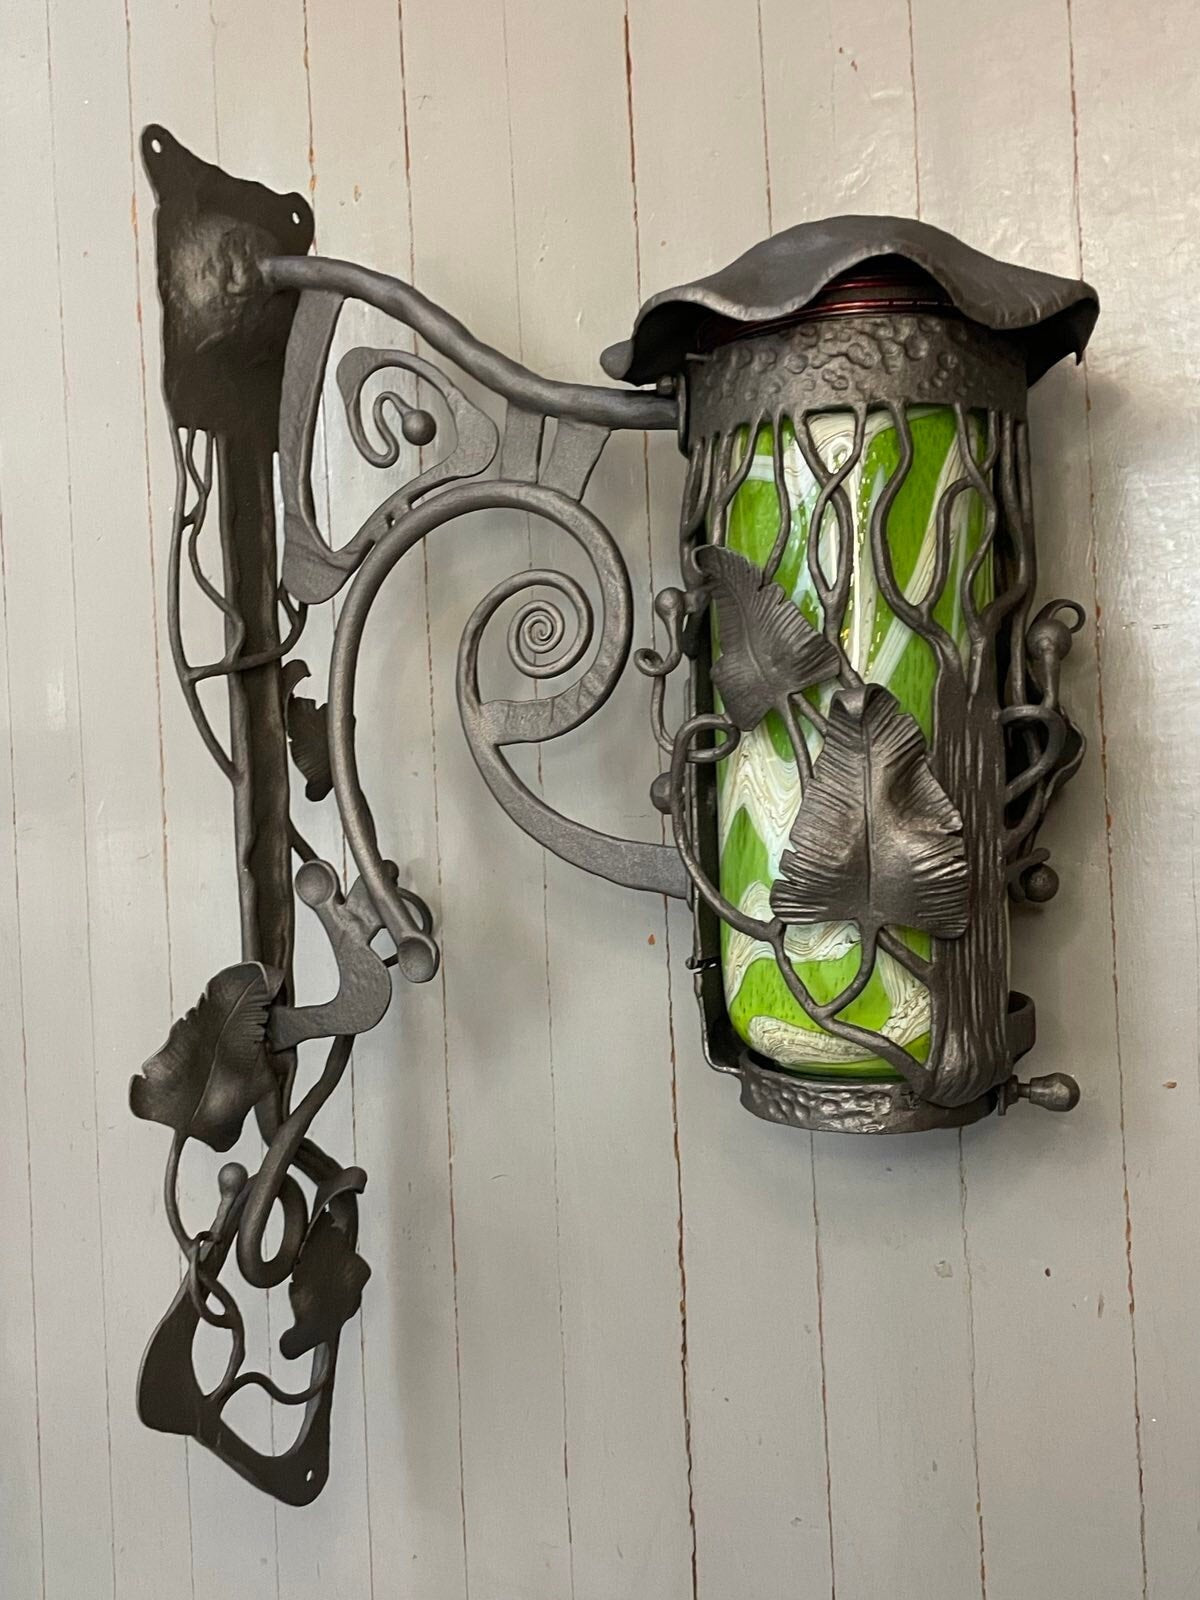 Sconce, lamp, lantern, renovation, Mothers Day, birthday, anniversary, porch, ForgedCommodities, blacksmith, hand forged, wow gift, medieval